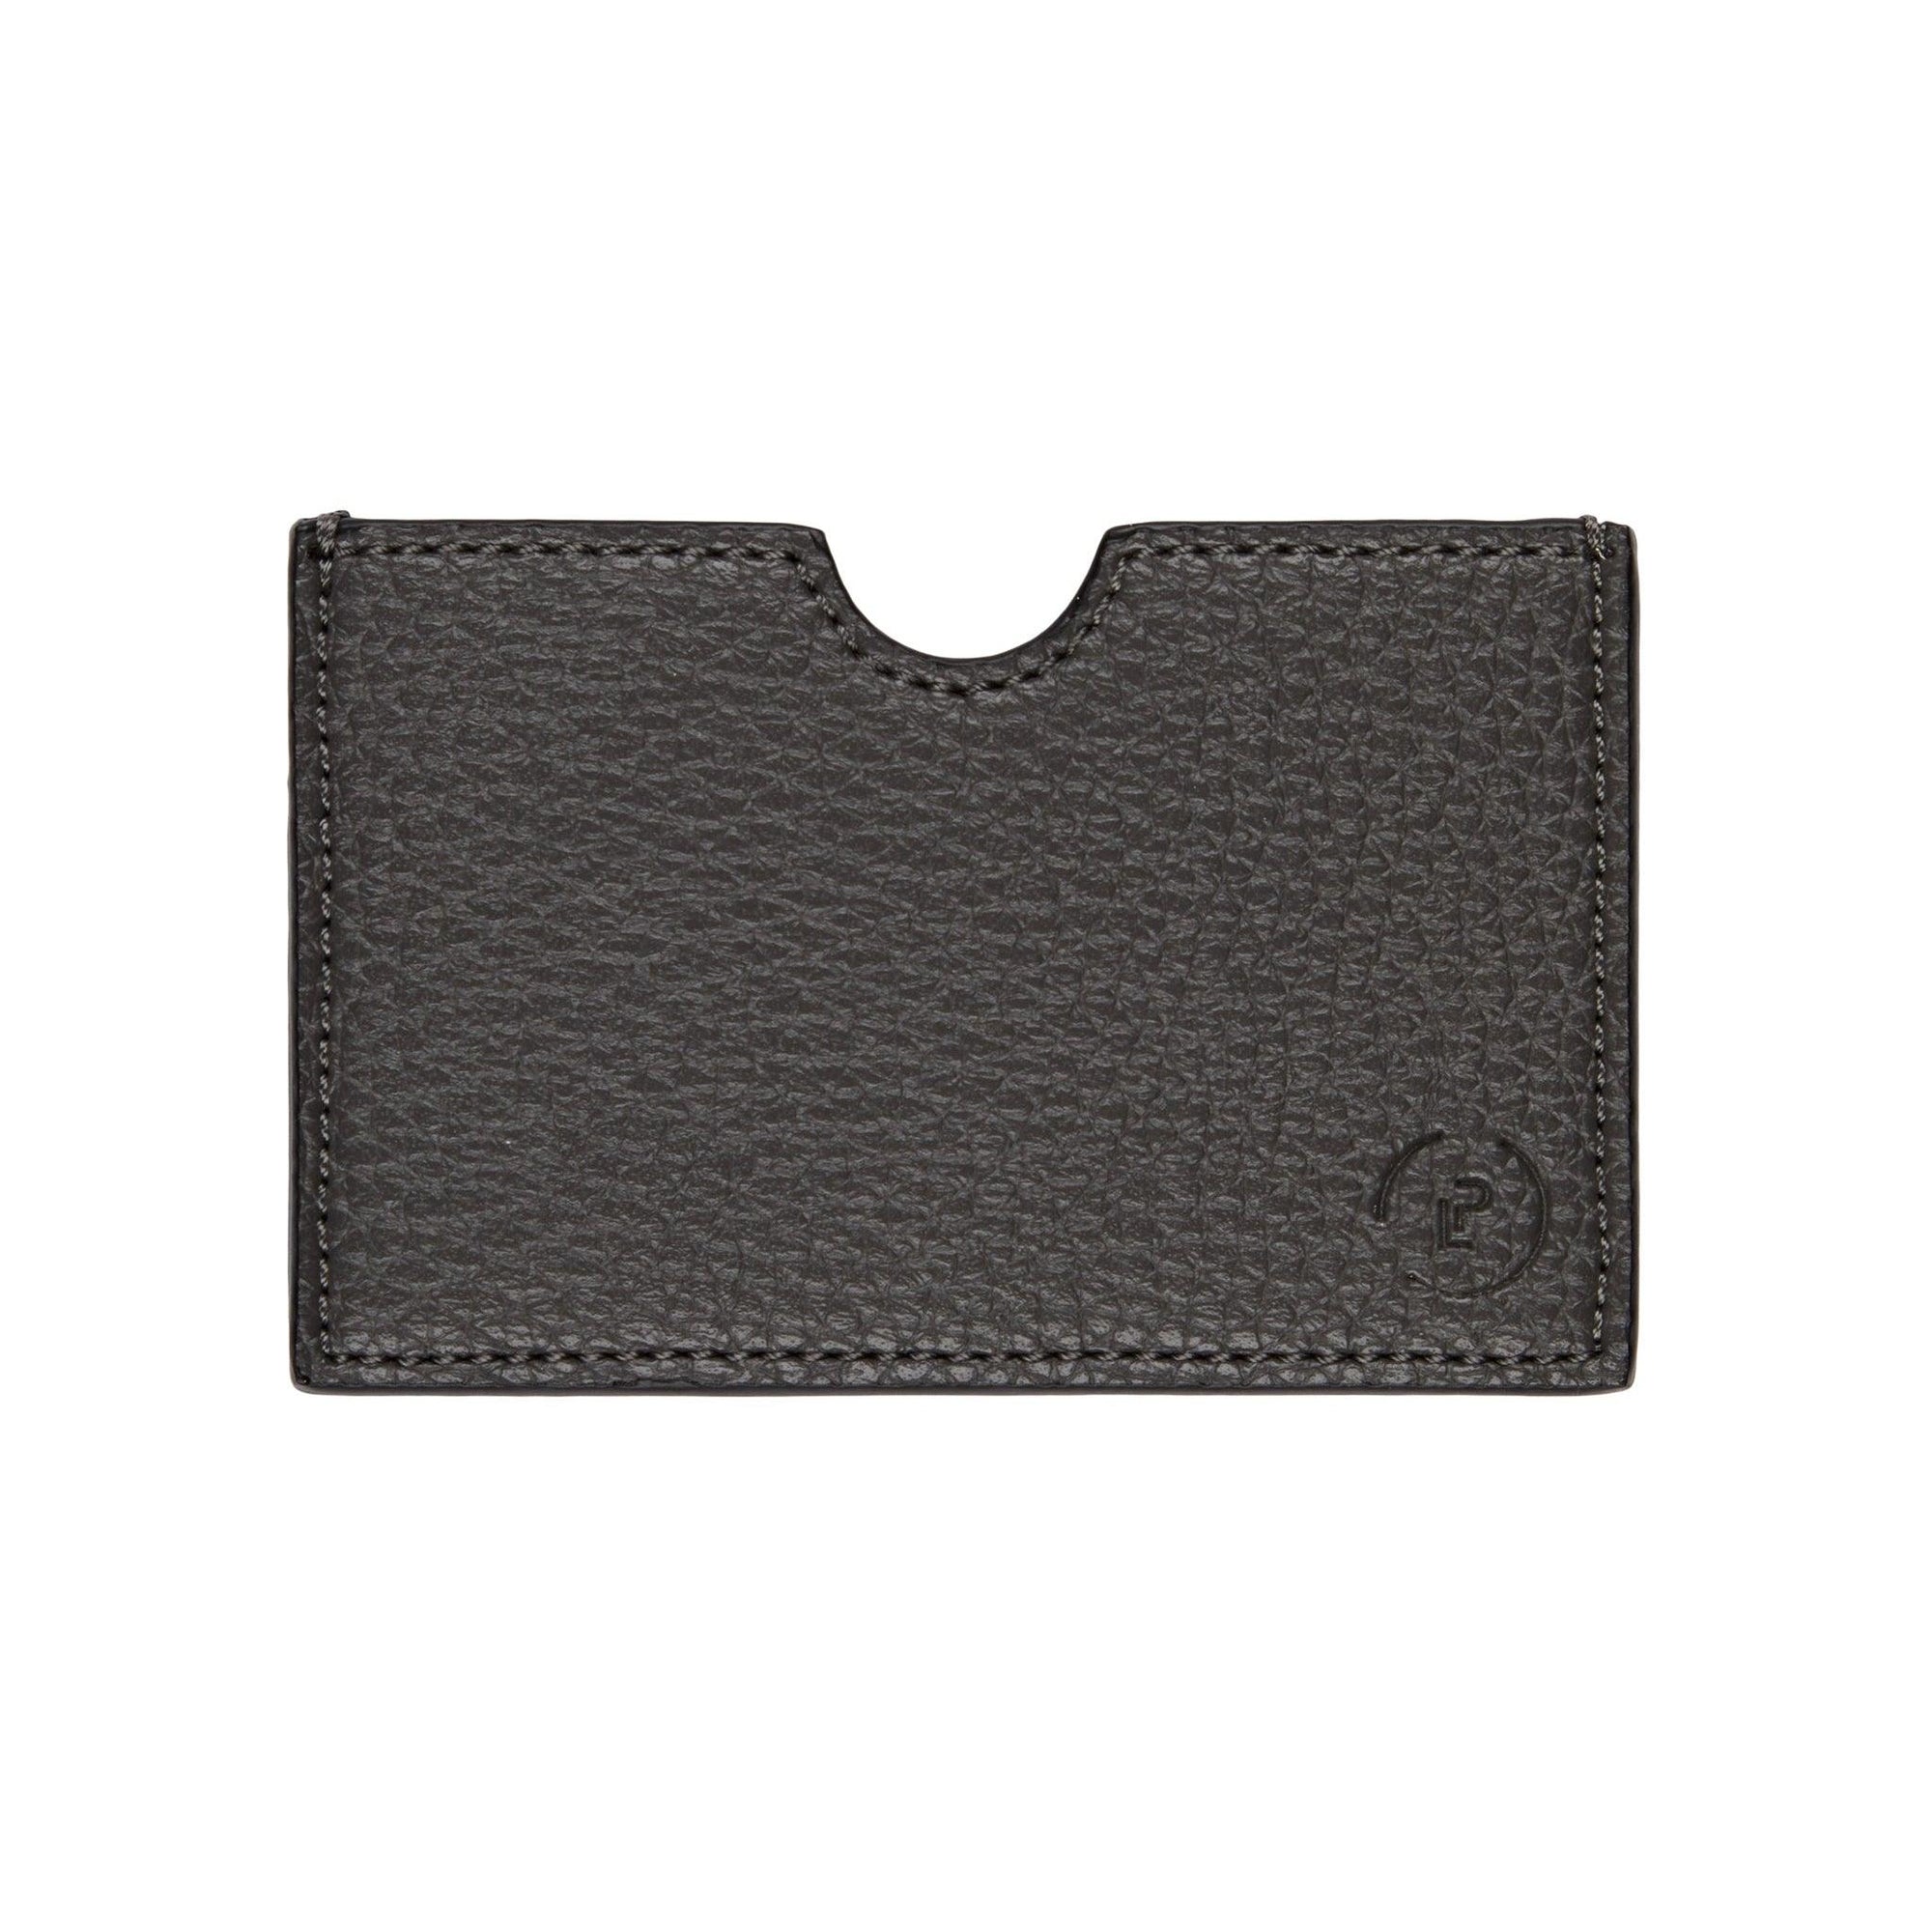 Card Wallet in Charcoal Ink colourway 